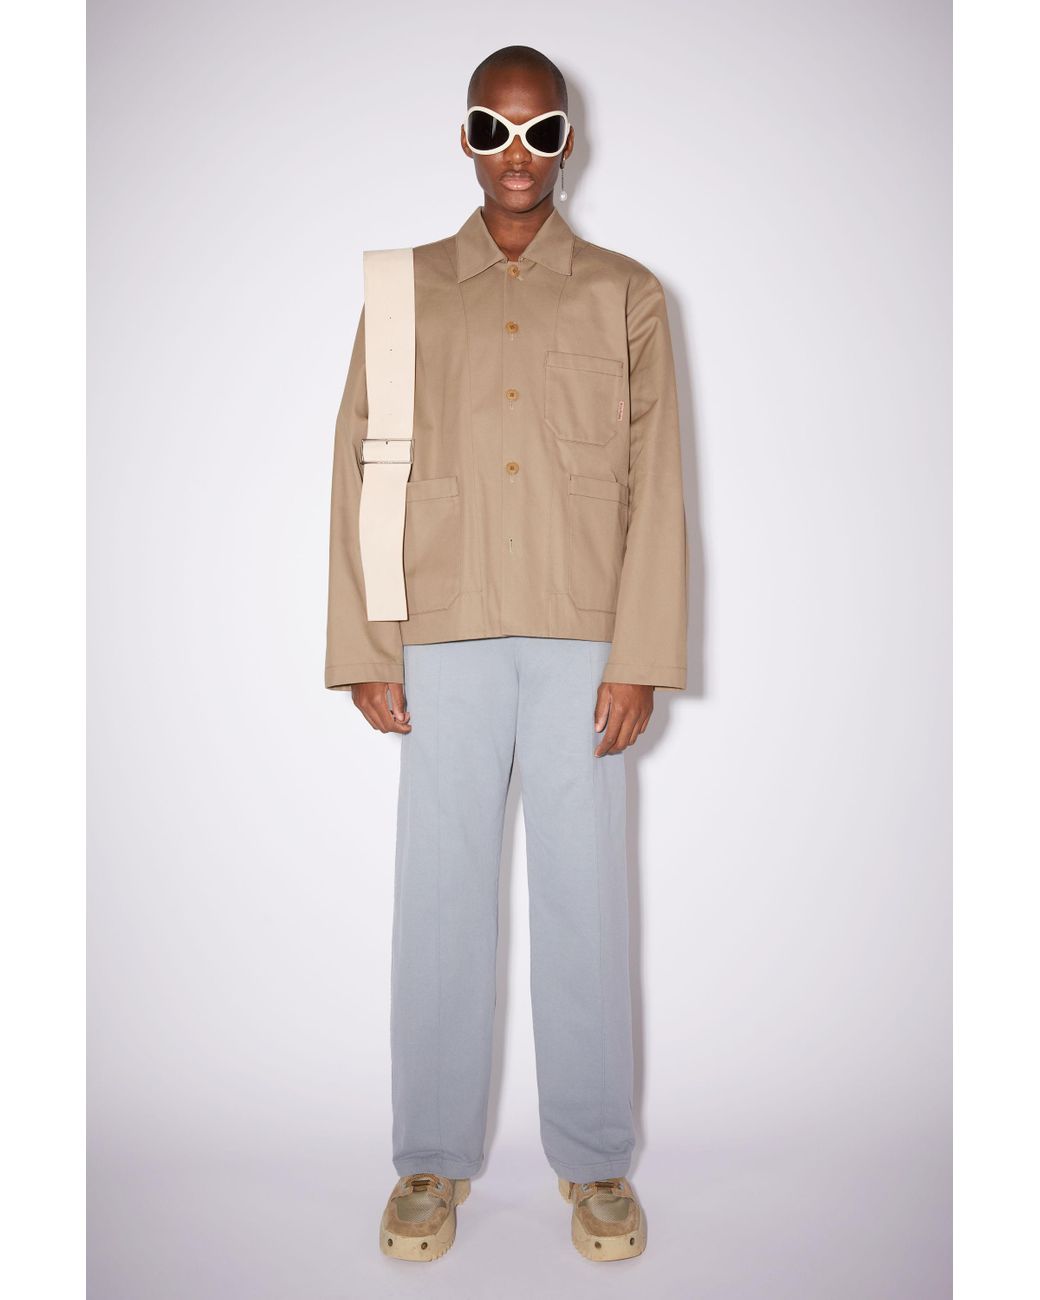 Acne Studios Cotton Twill Jacket in Natural for Men | Lyst